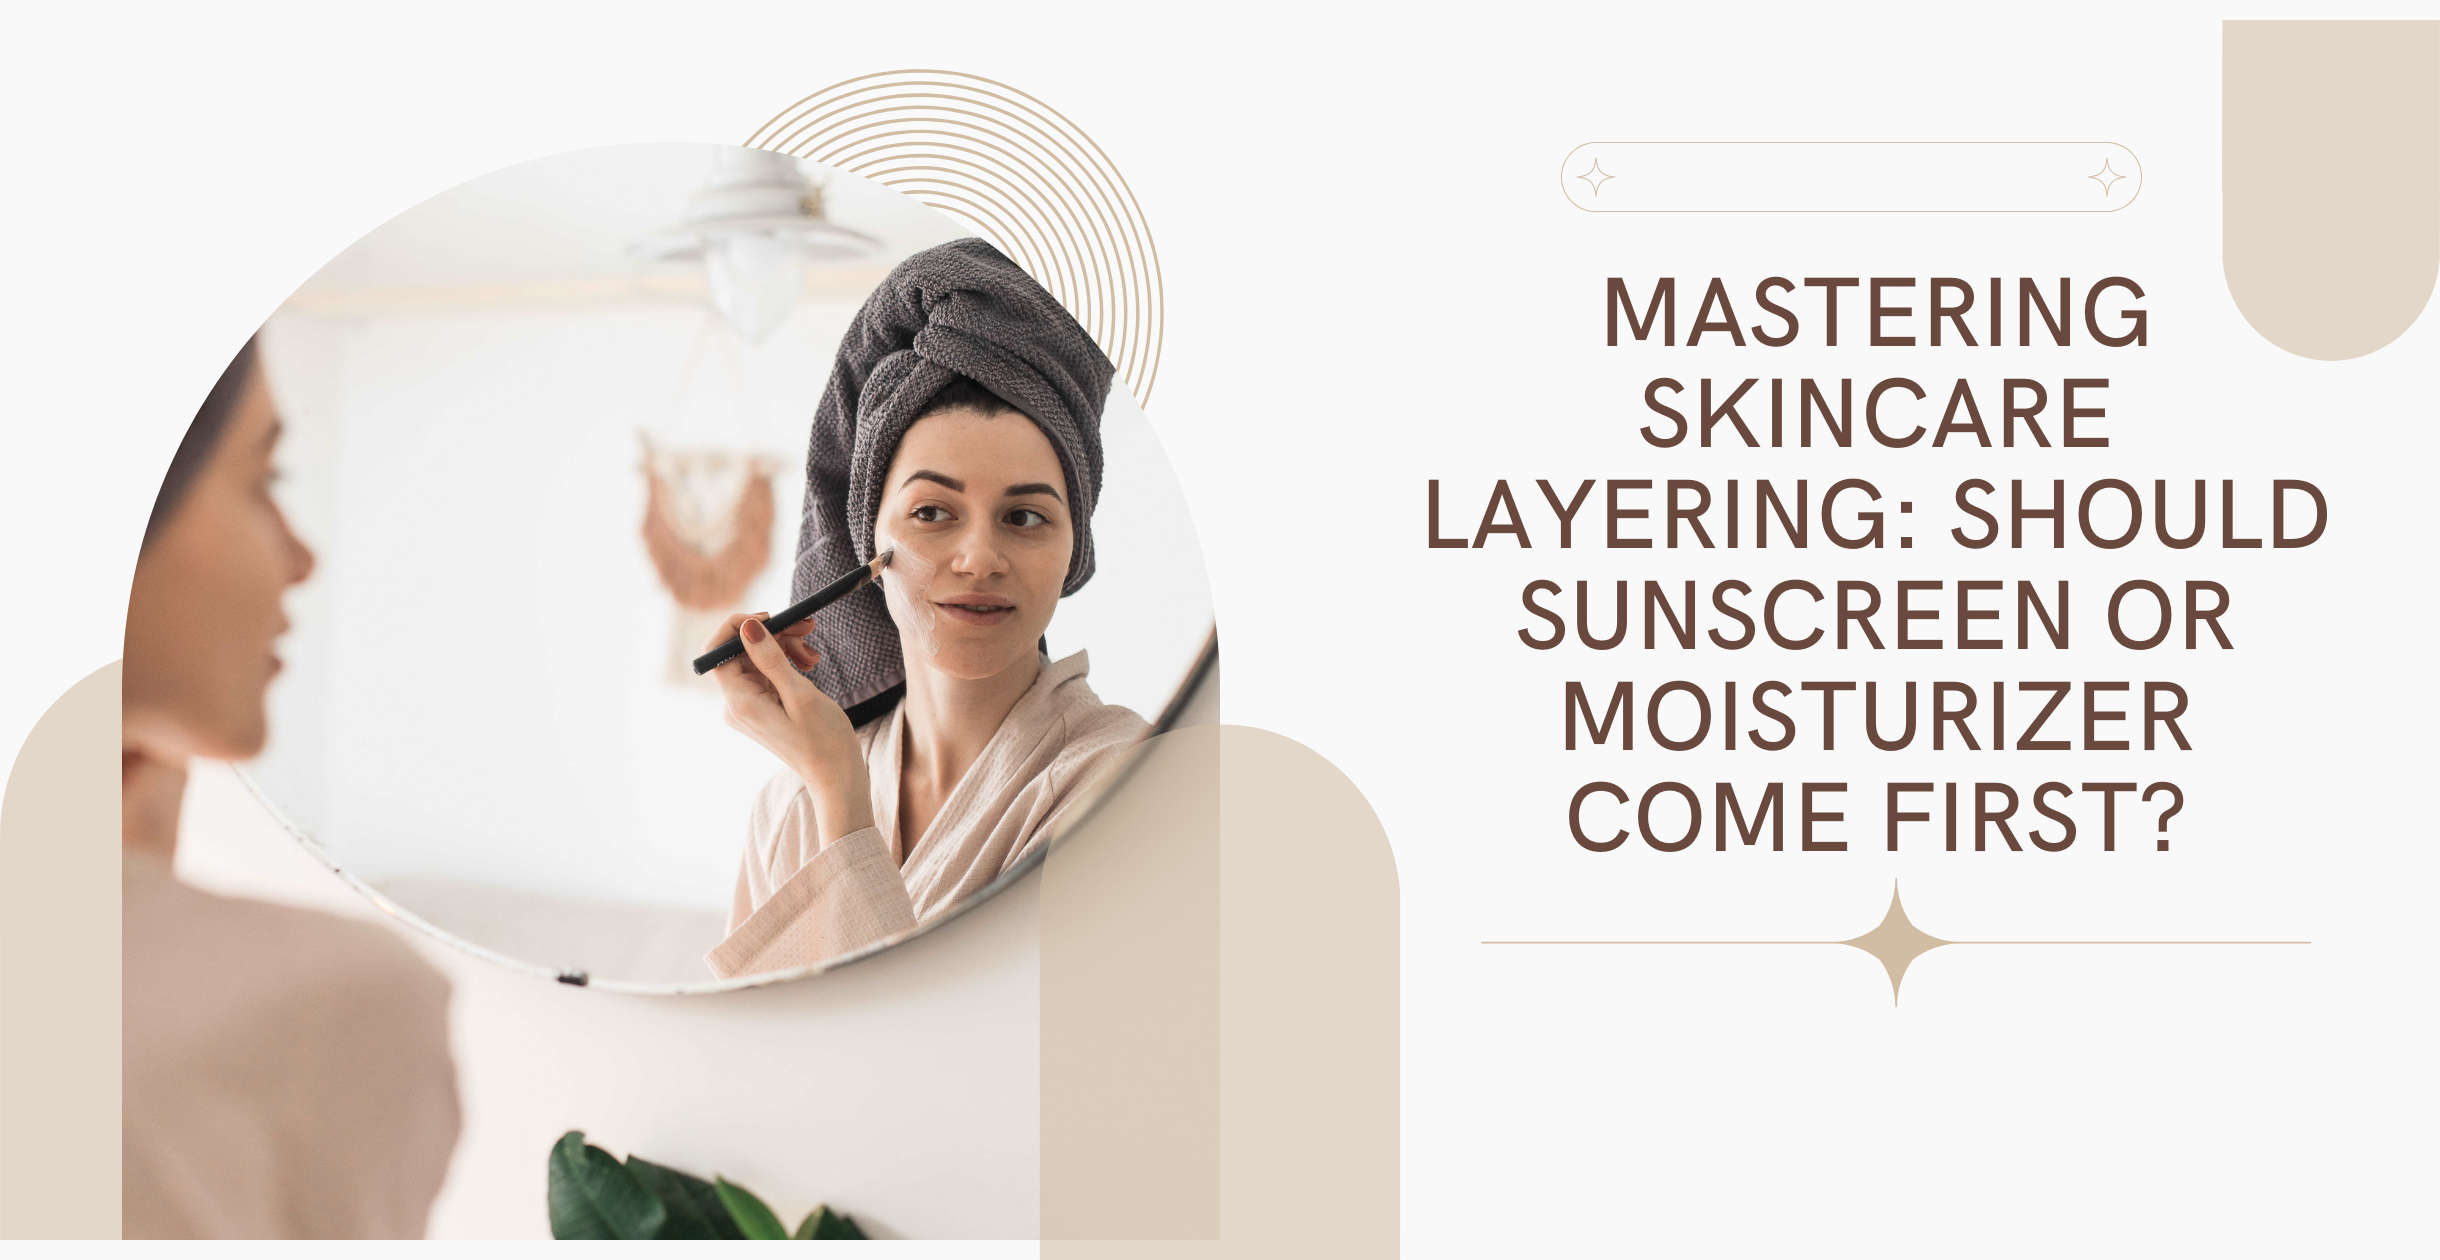 Mastering Skincare Layering: Should Sunscreen or Moisturizer Come First?